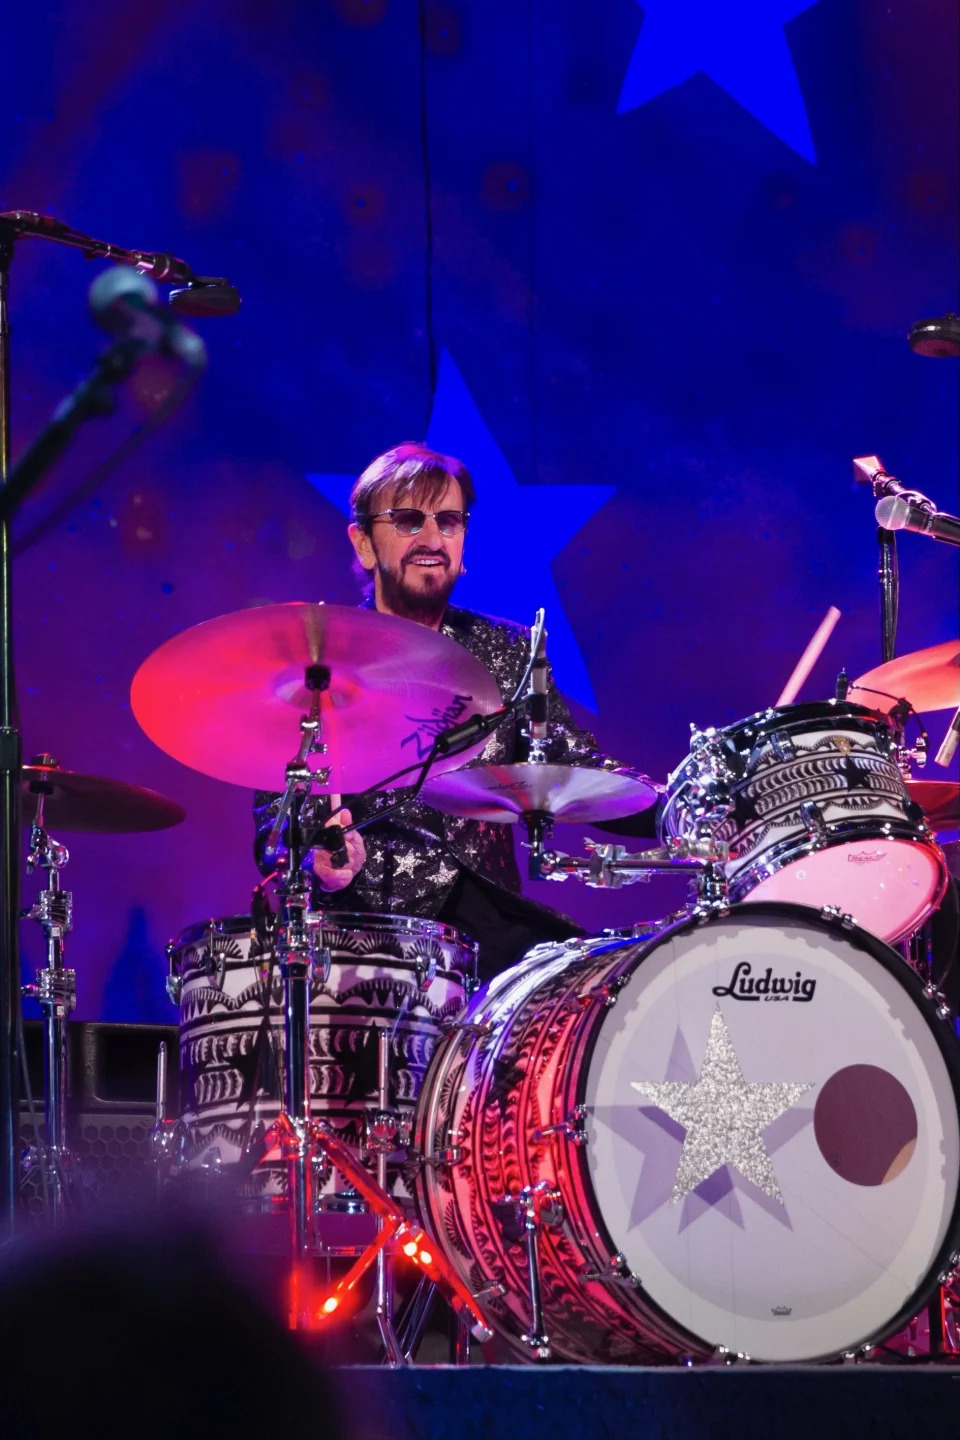 Ringo Starr says he rarely plays his drums unless he's recording, rehearsing or playing live with the All-Starr Band.